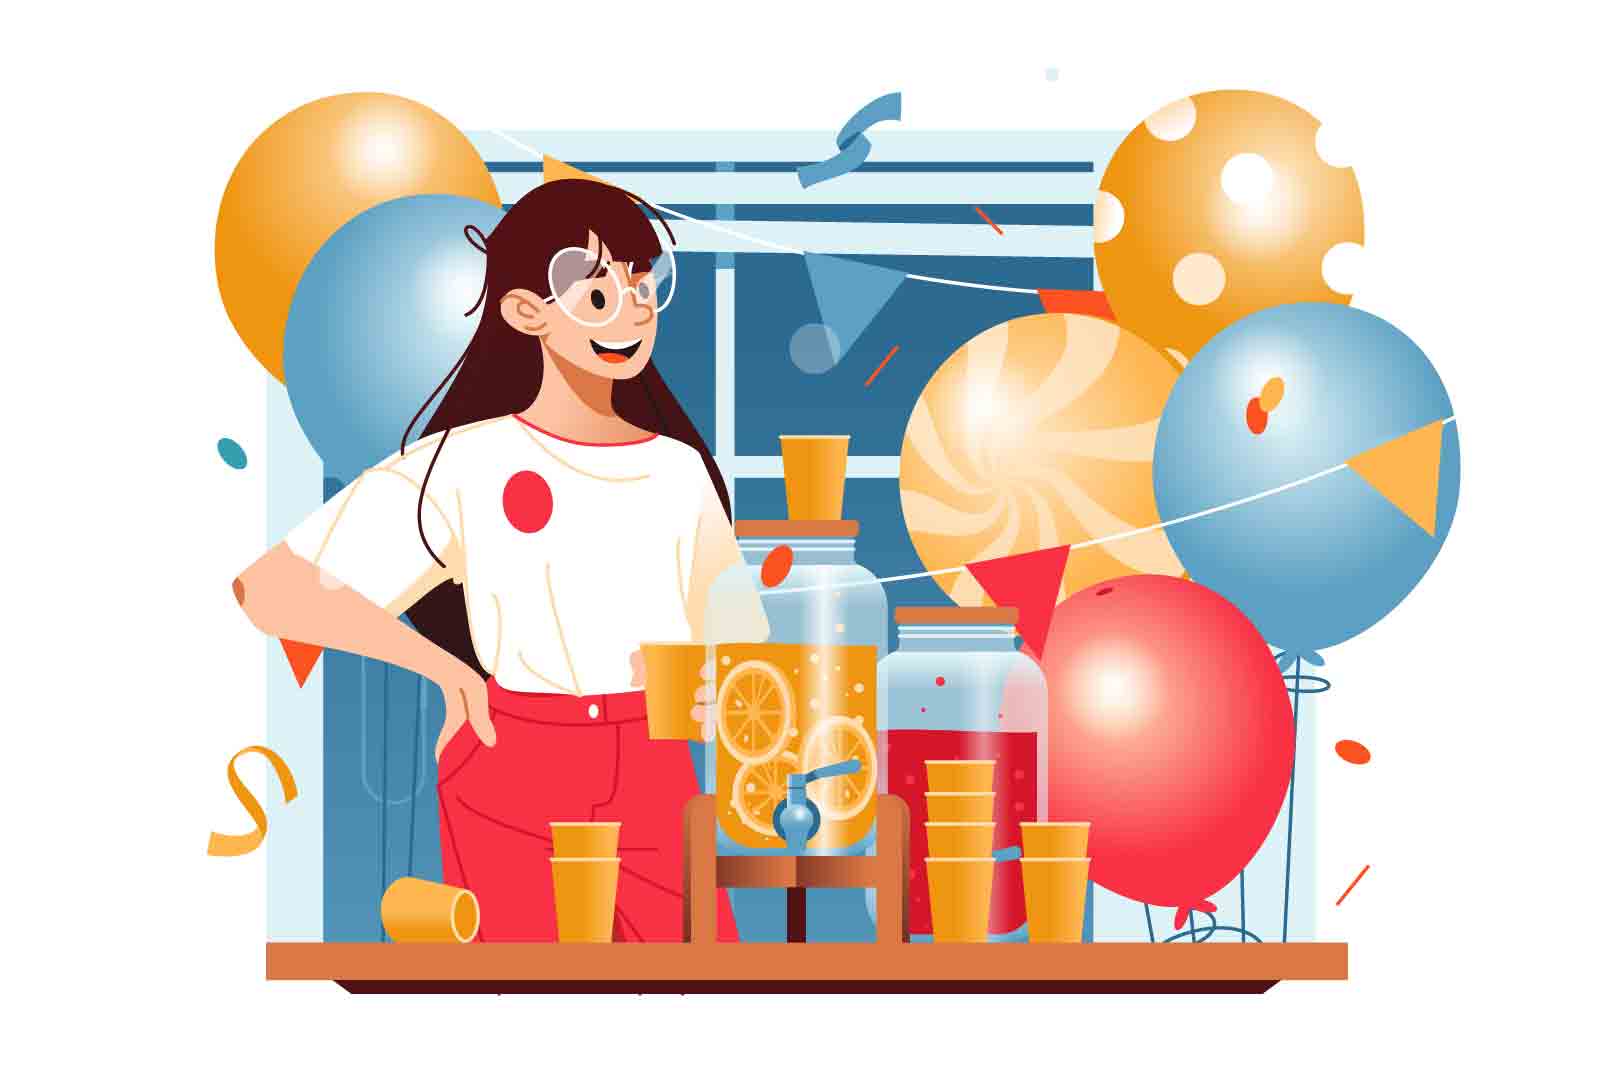 Girls at corporate party nearby table with drinks, vector illustration. Celebratory setting, with juice-like drinks and festive balloons.